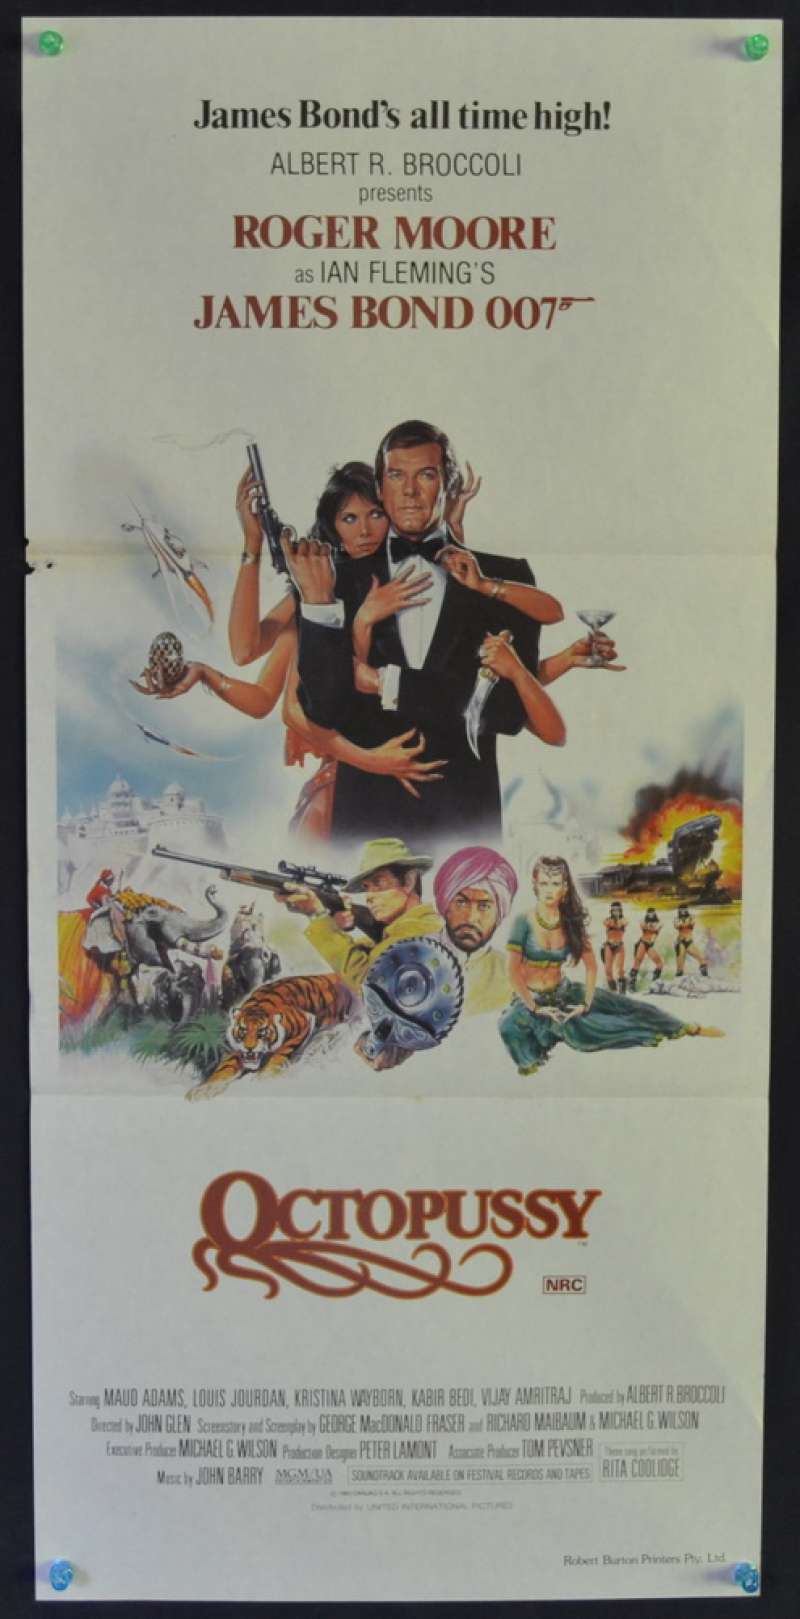 All About Movies - Octopussy Poster Original Daybill 1983 Roger Moore ...